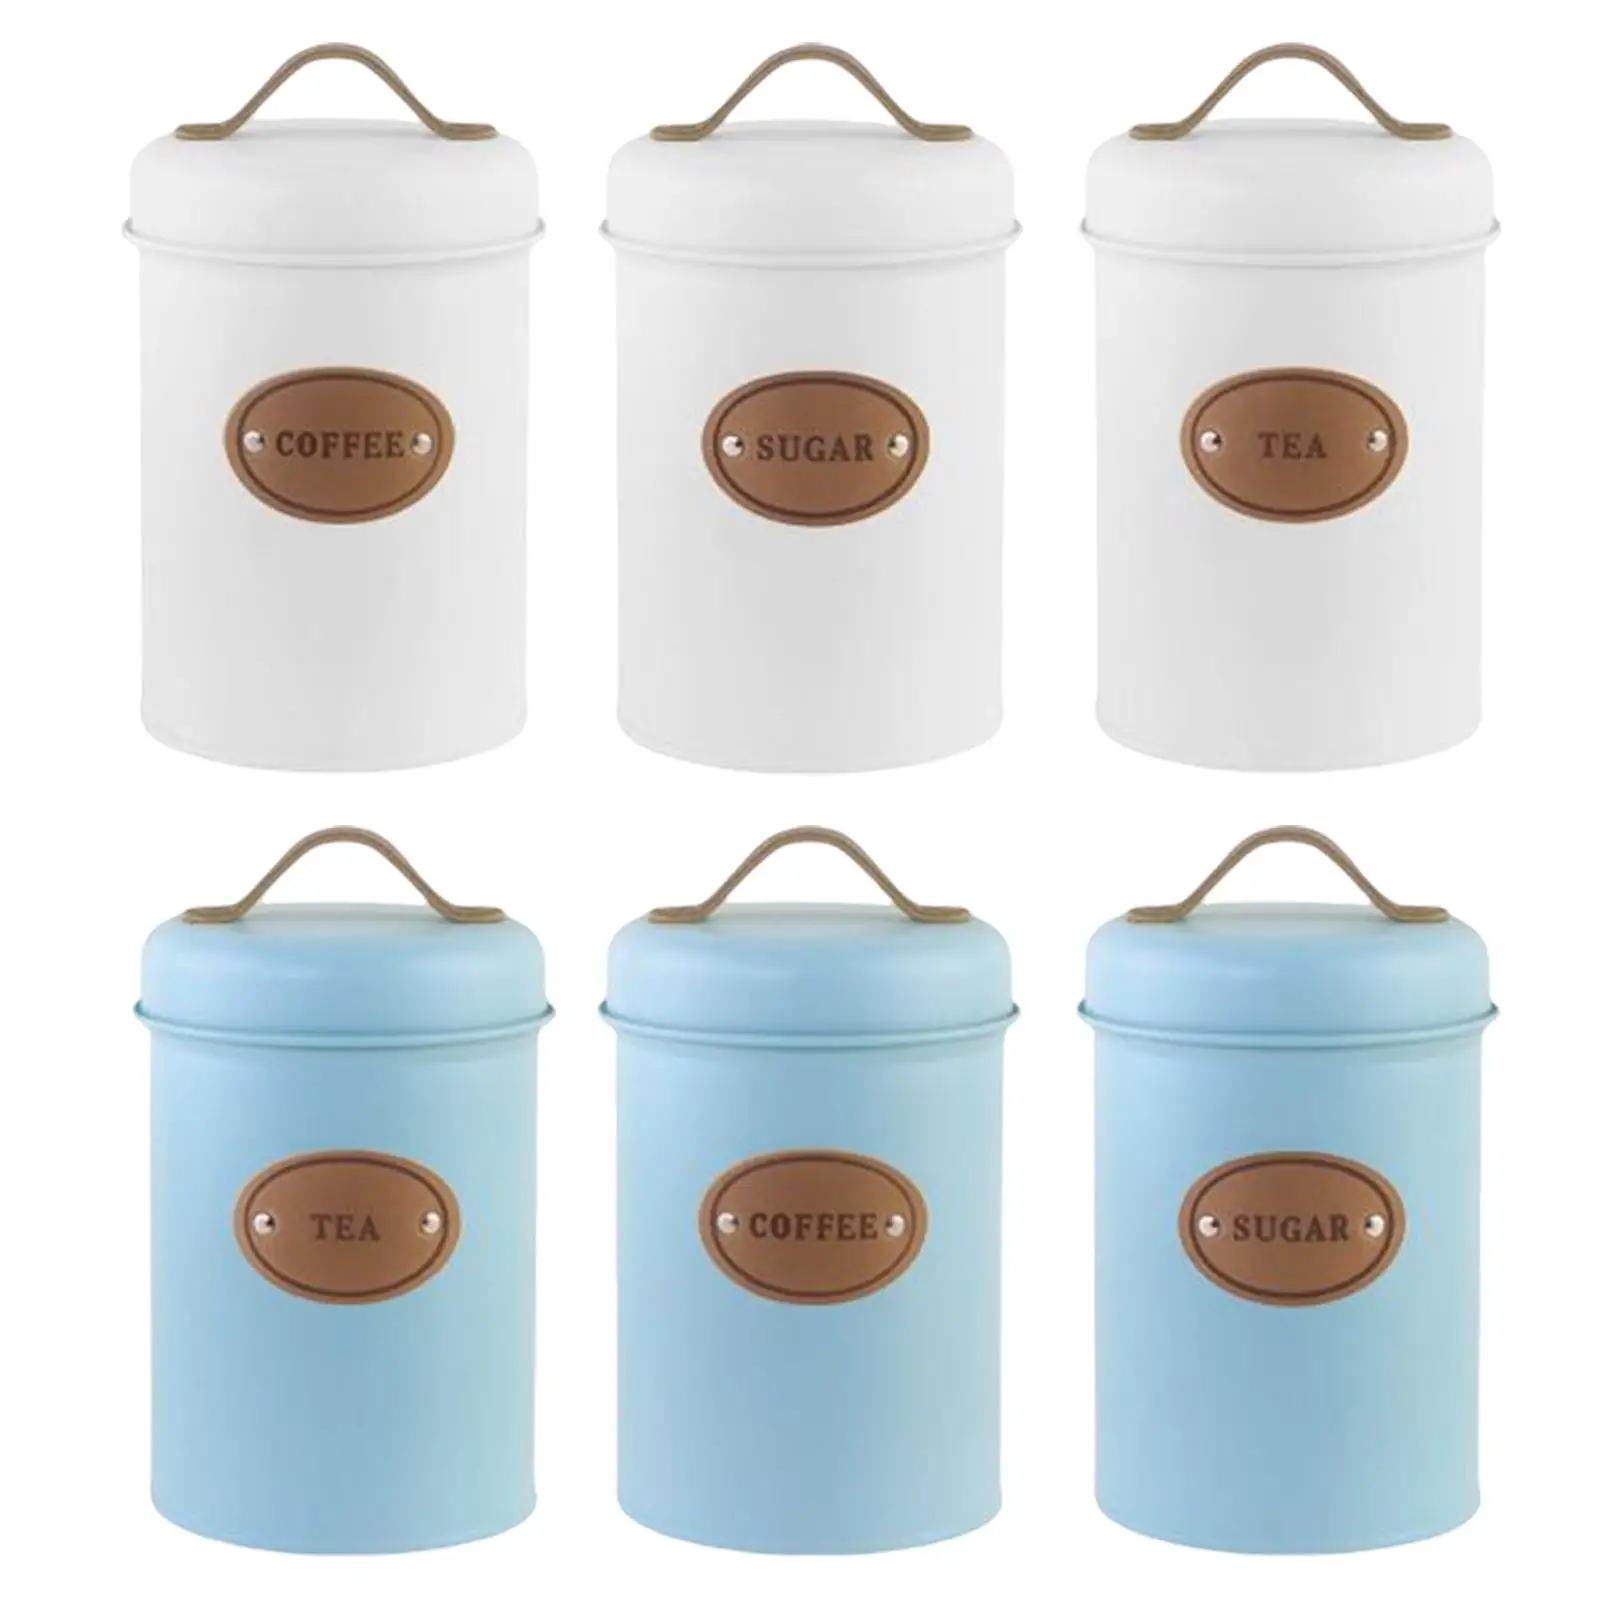 Storage Canisters with Tight Sealing Sugar Coffee Tea Organization Durable Kitchen Canister Set for Kitchen Restaurant Bedroom